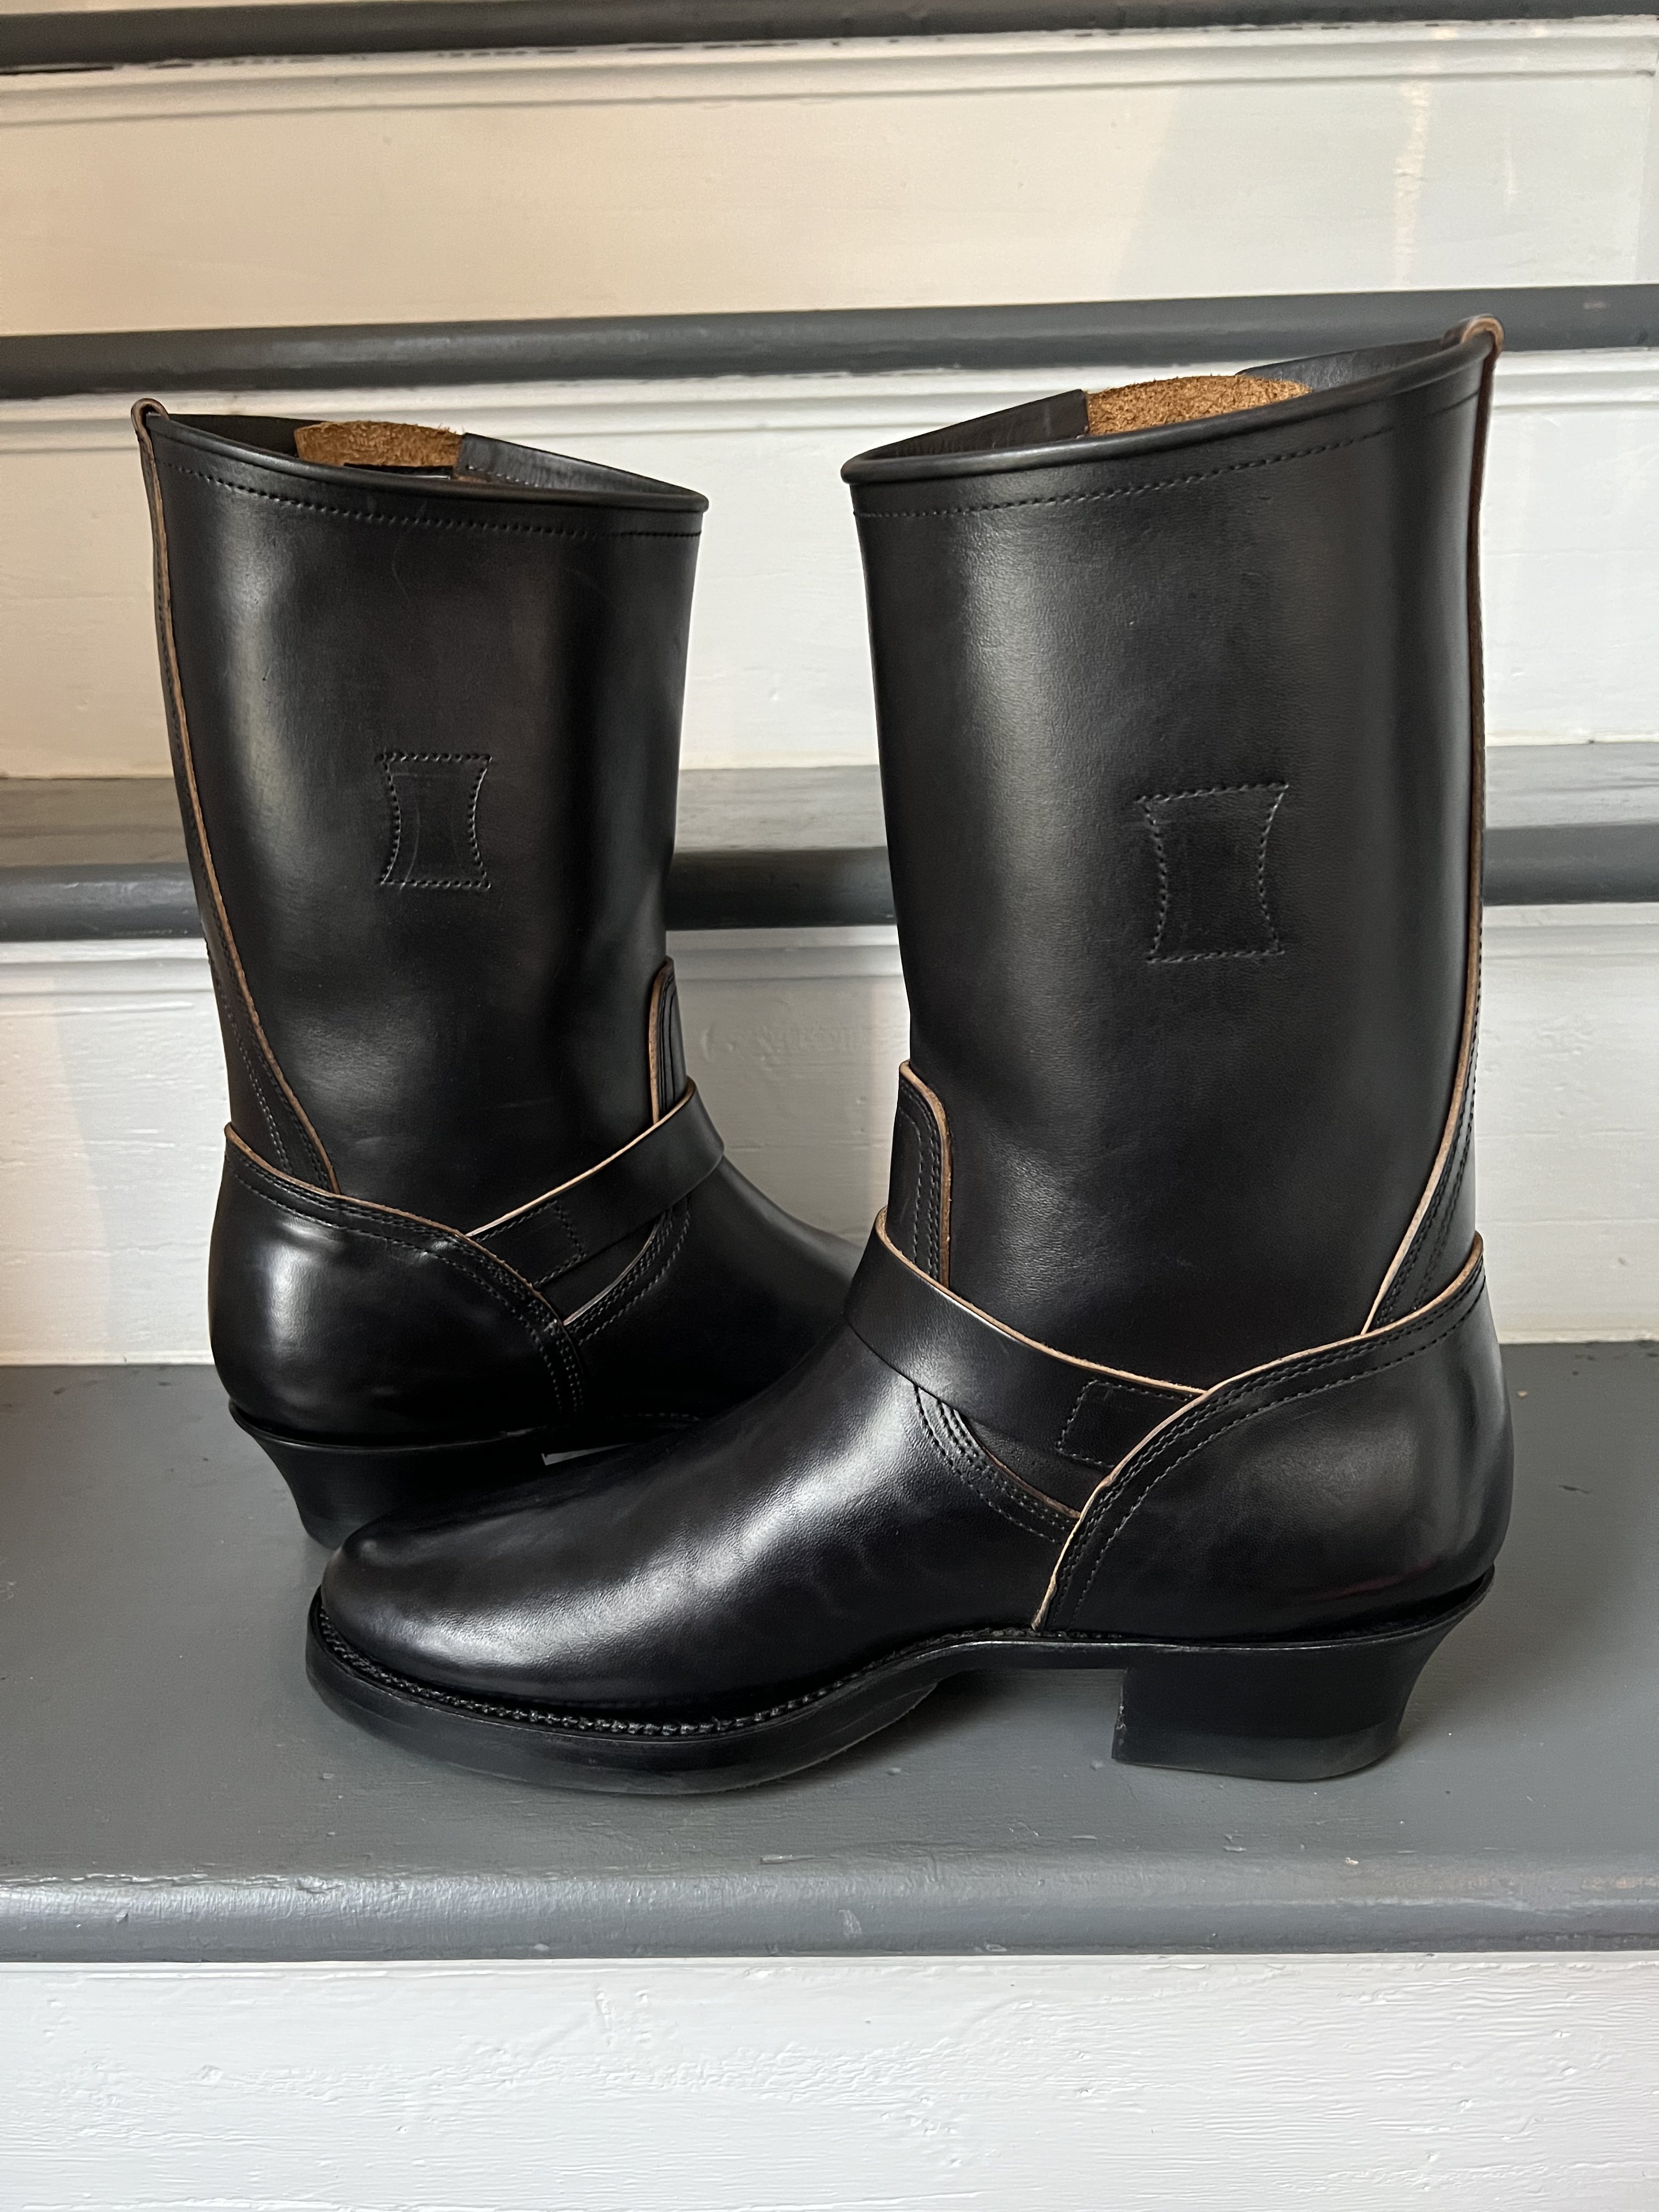 Interest check: Clinch Horsebutt Engineers - US10 black and US9.5 ...